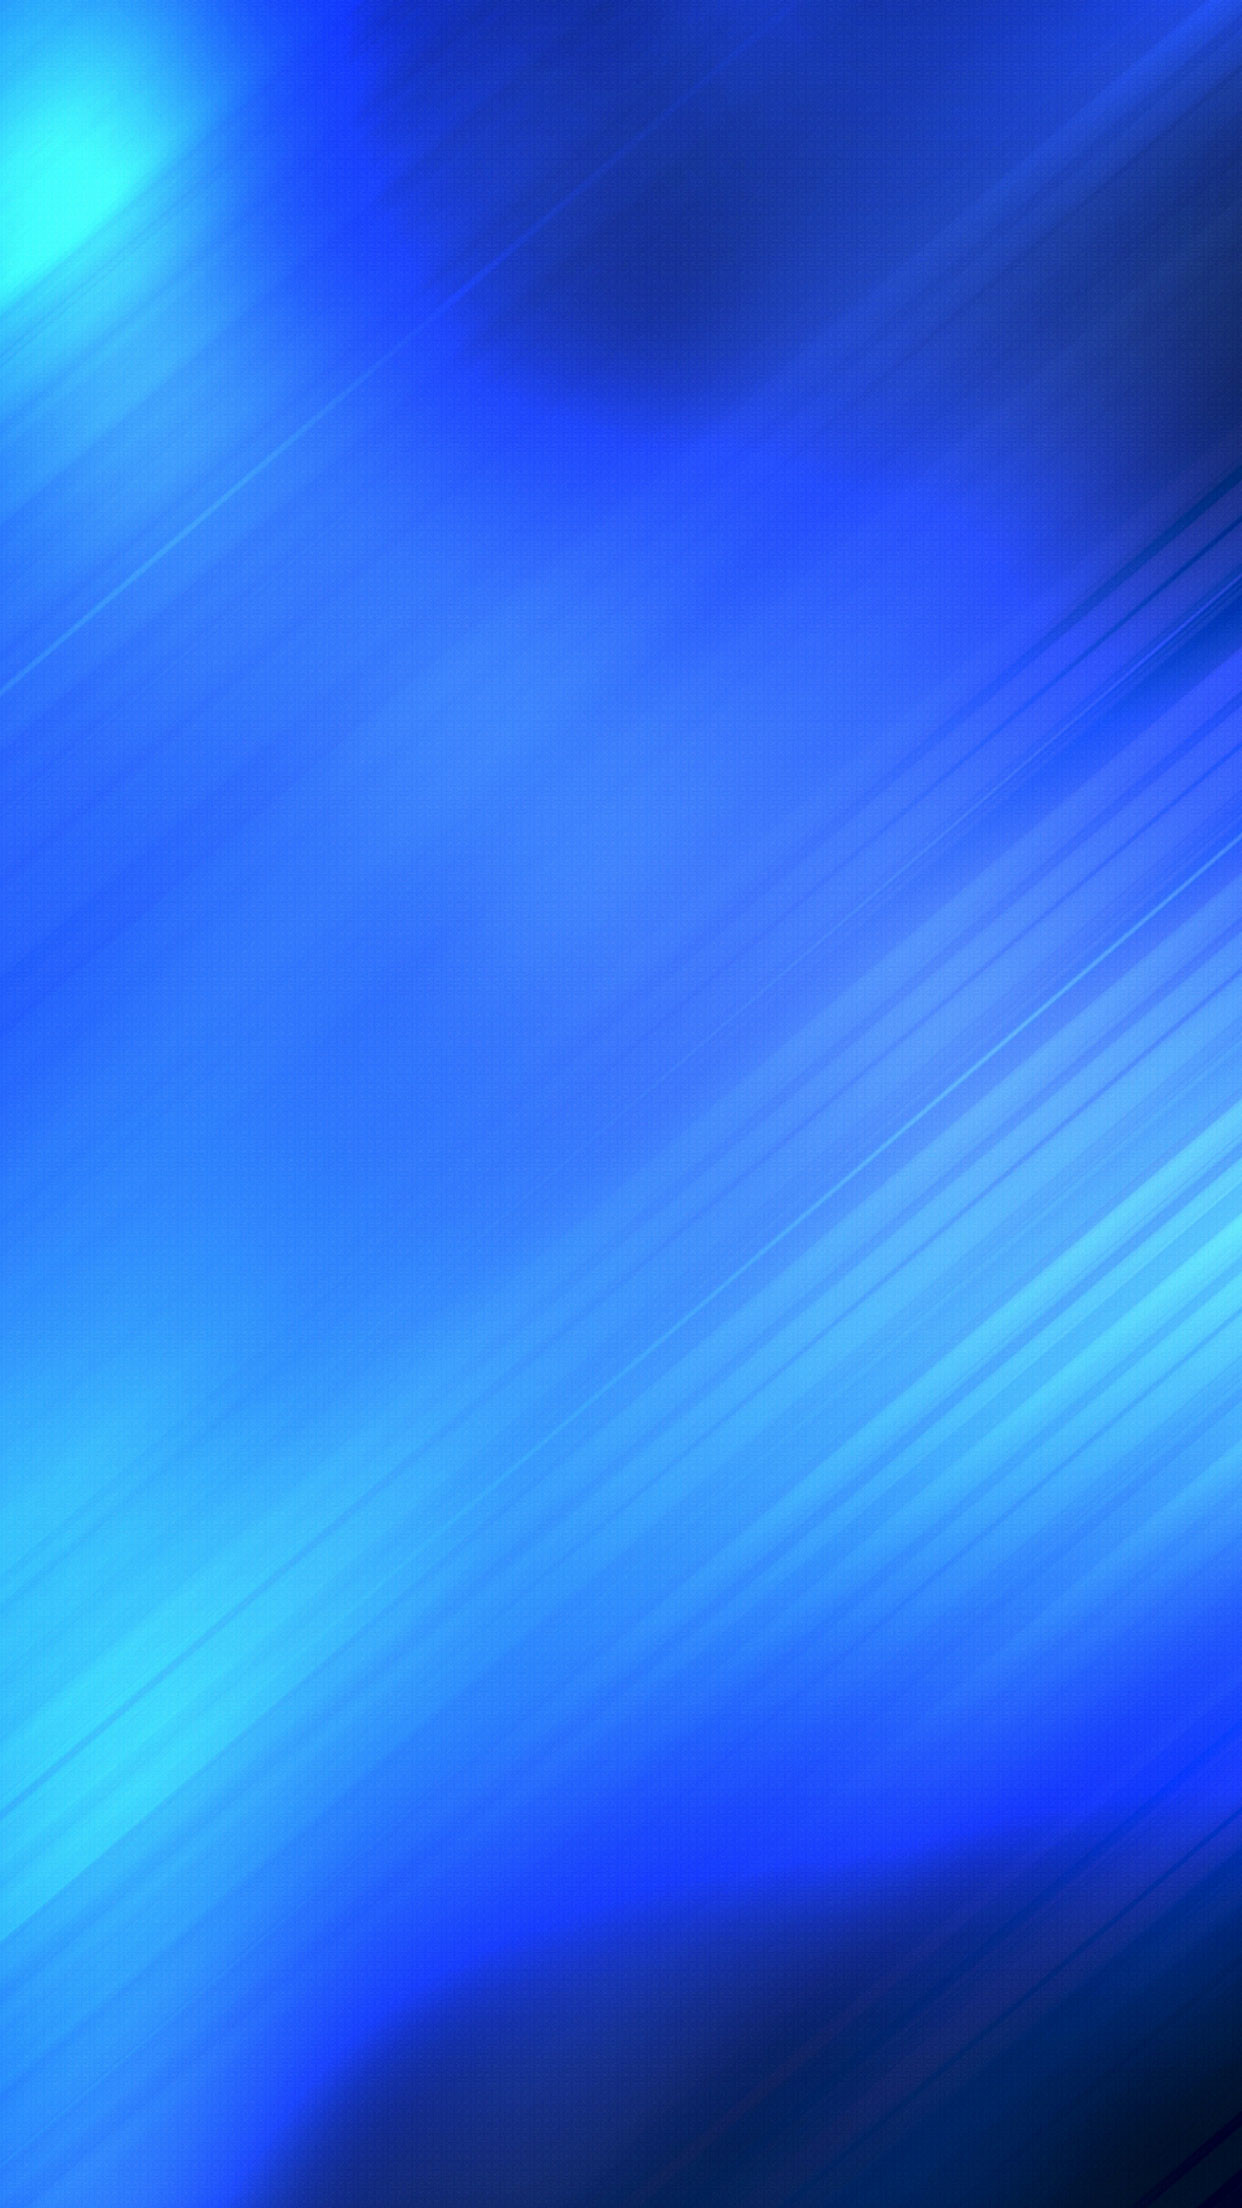 1242x2208 Blue Abstract lines wallpaper #Iphone #android #blue #abstract #wallpaper  check more